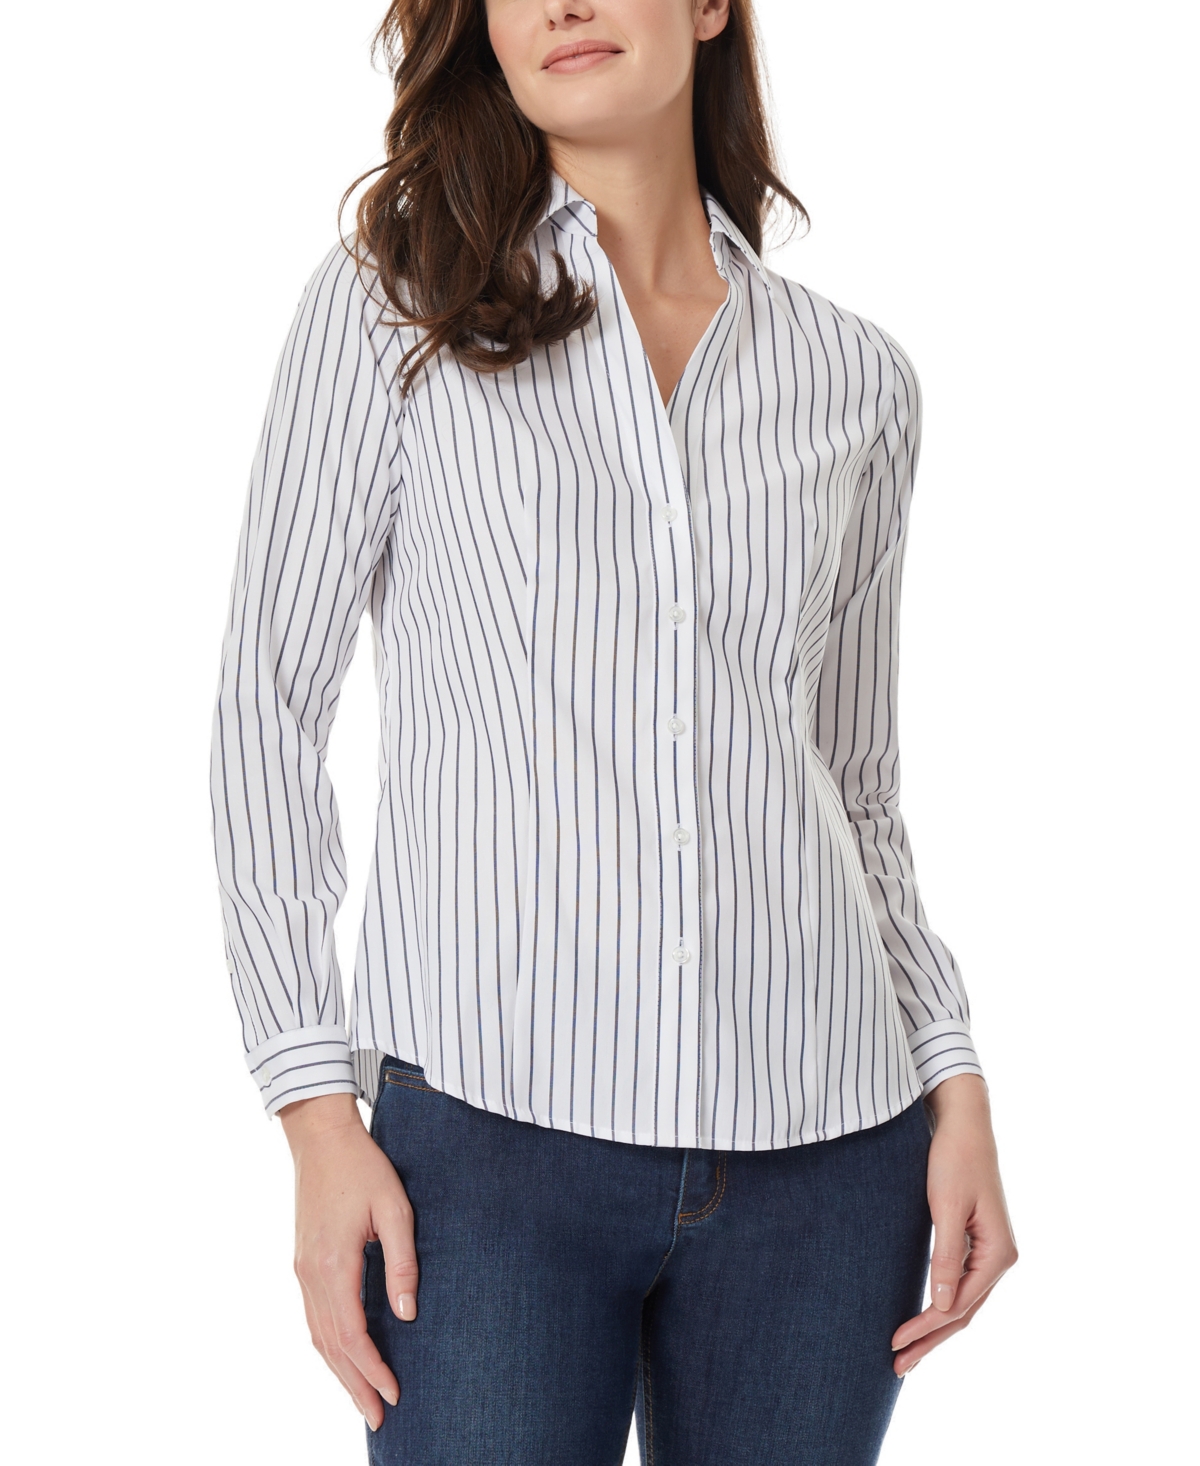 Women's Easy Care Button Up Long Sleeve Blouse - NYC White, Collection Navy